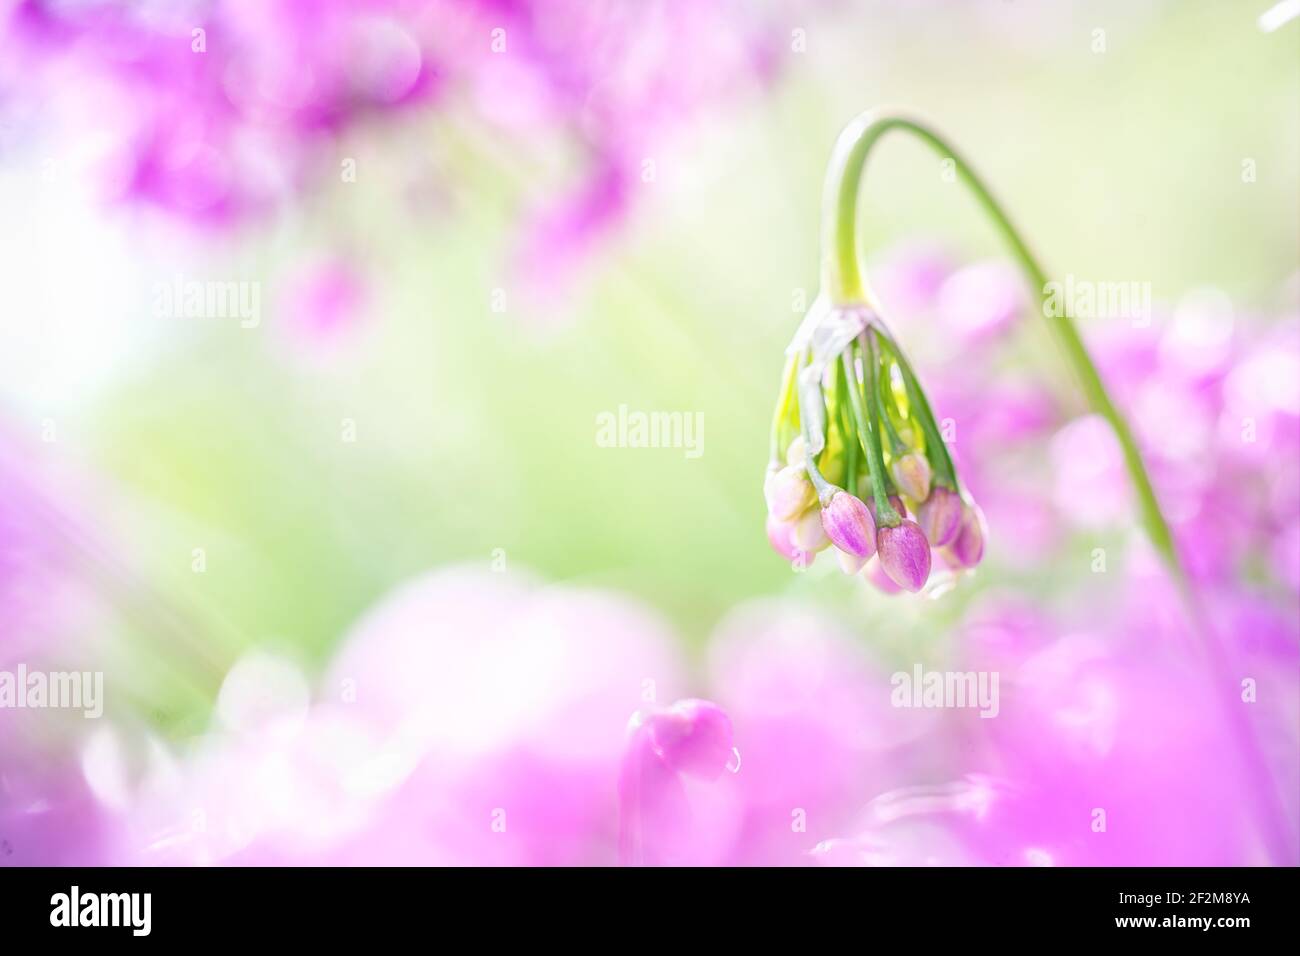 Pretty portrait of single allium cernuum or nodding onion with a  cluster of pink buds. On right of frame with out of focus pink and green background. Stock Photo